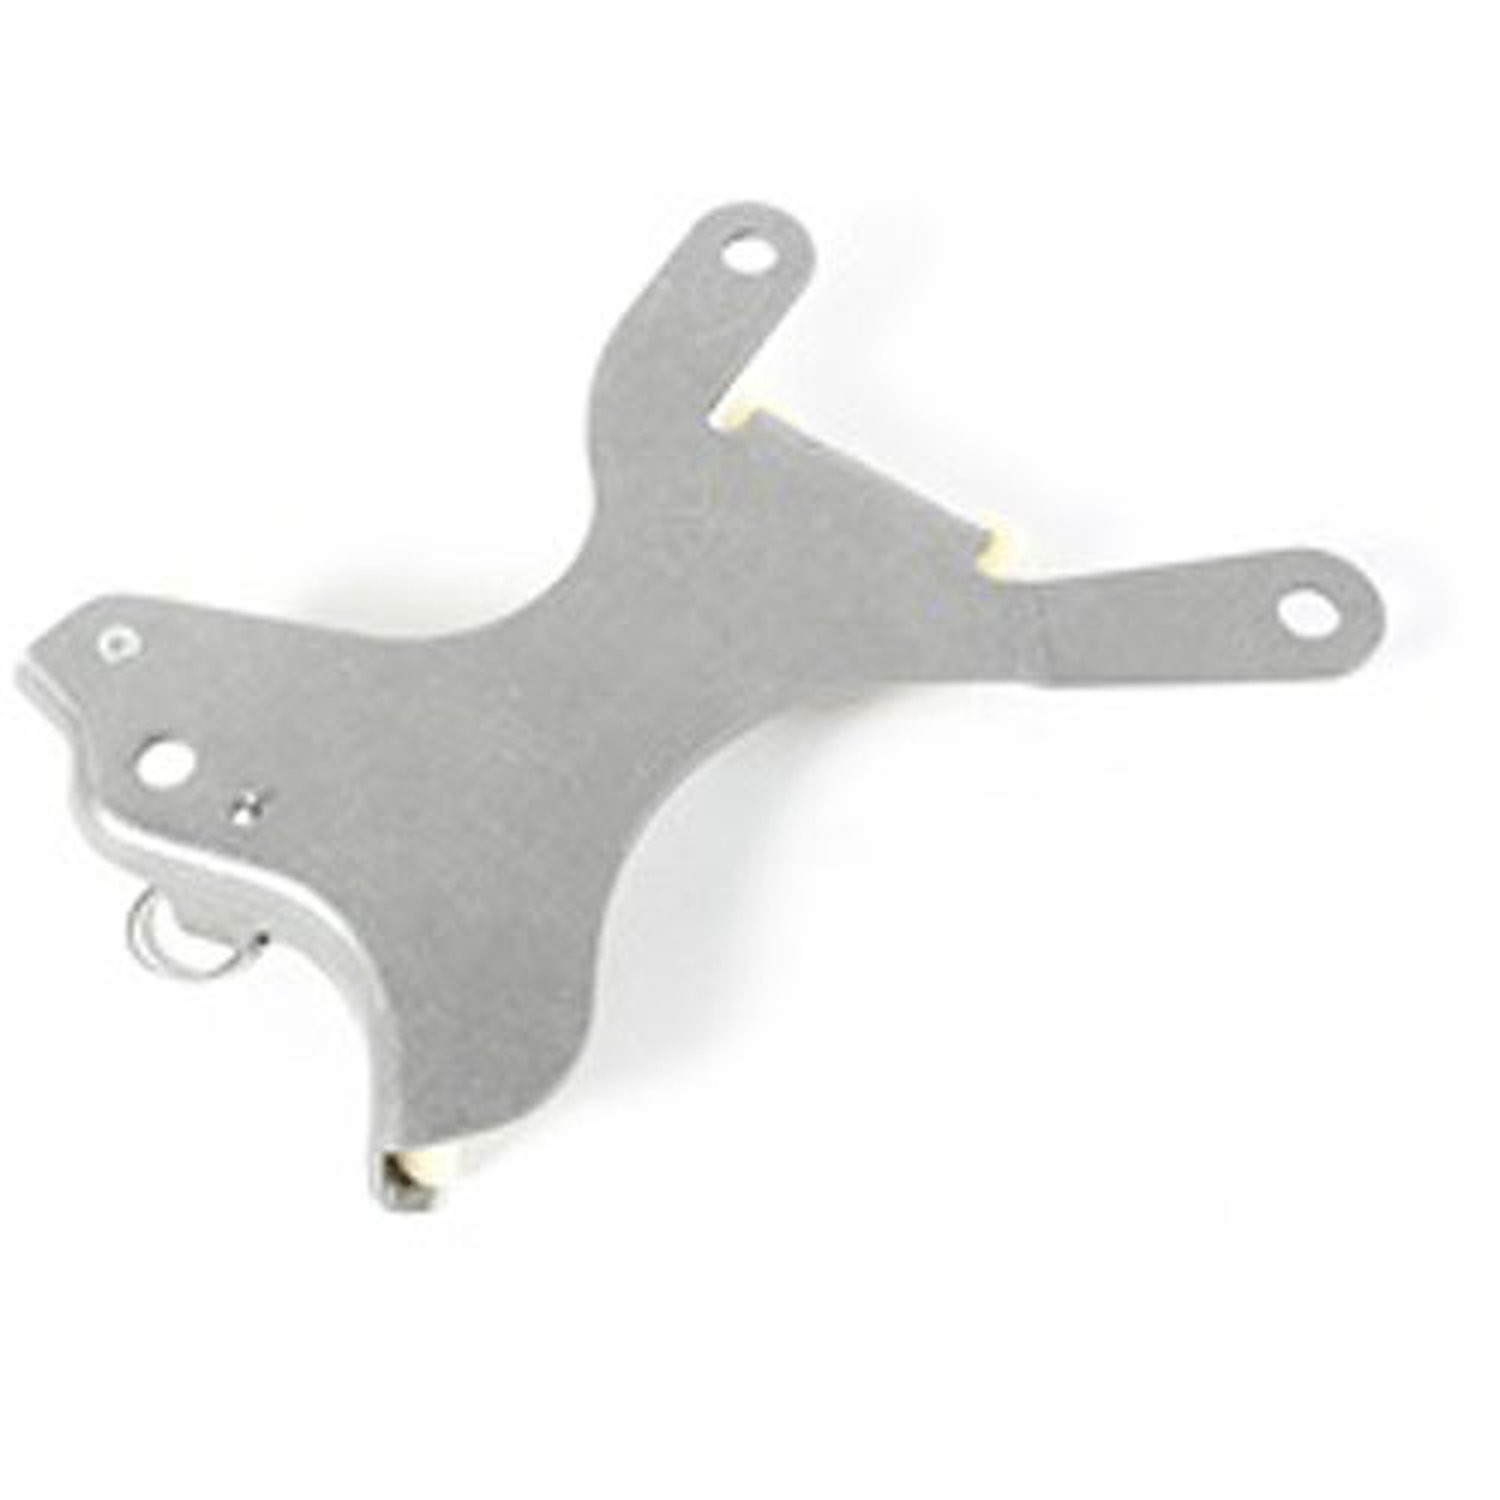 This primary chain tensioner from Omix-ADA fits 3.7L & 4.7L engines in 06-10 Jeep Commanders 99-10 G